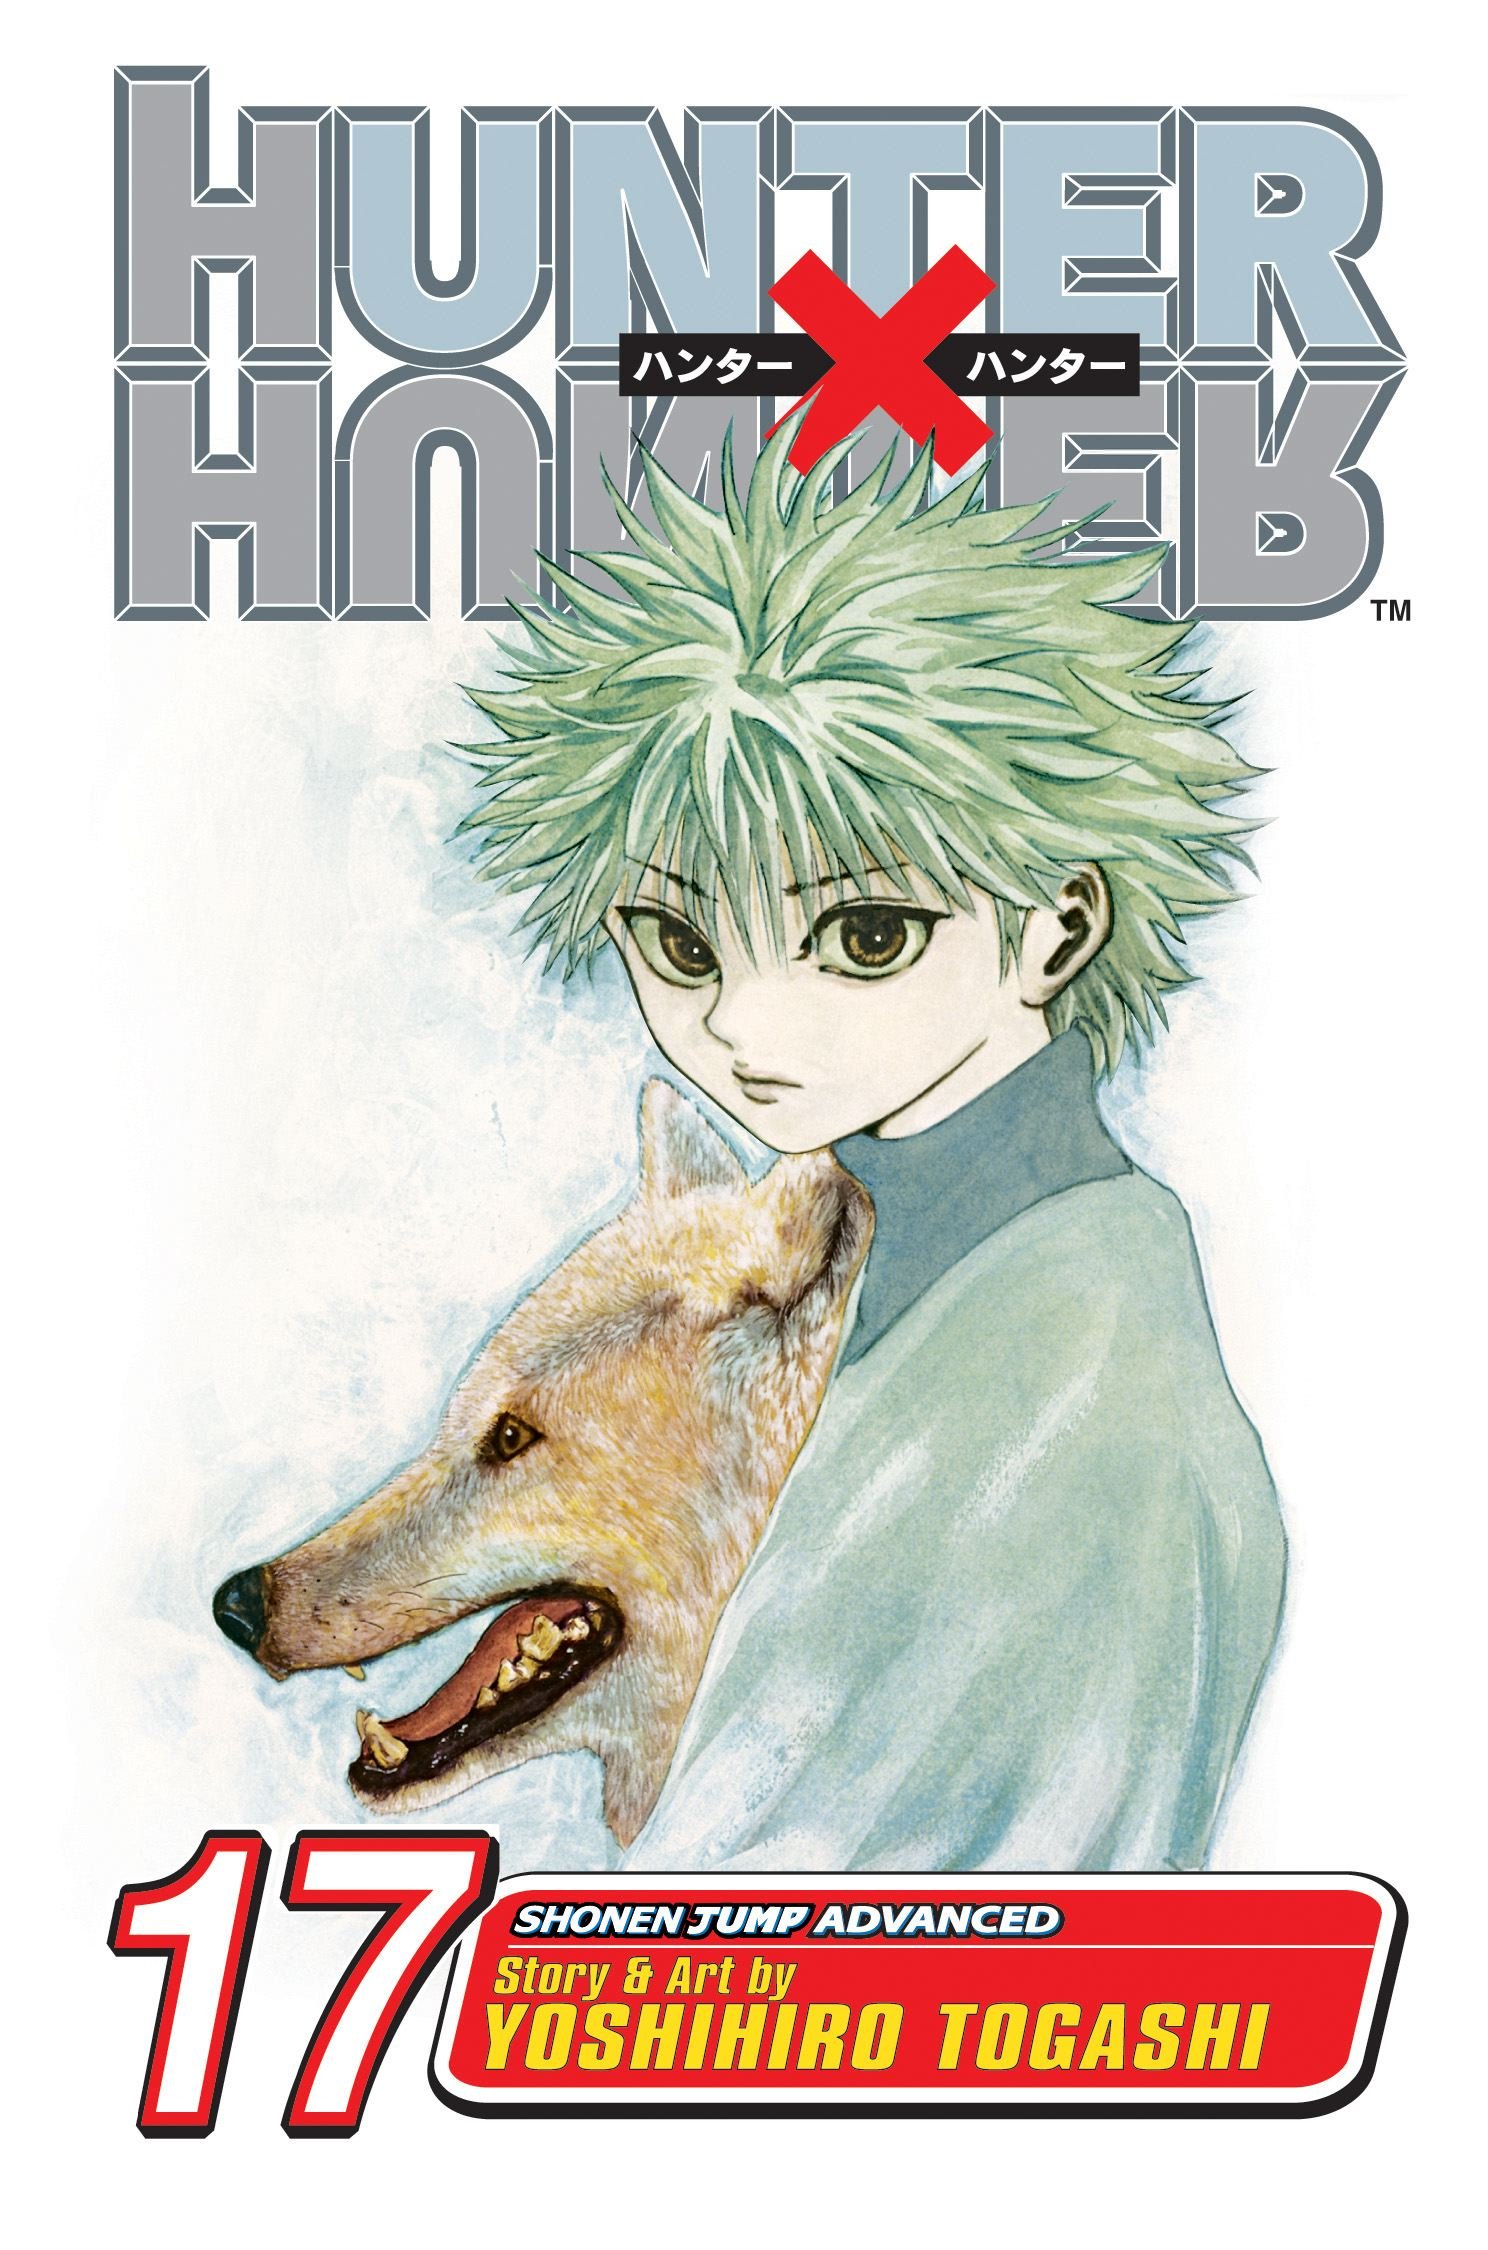 Is there any clarification from the publisher/author of Hunter x